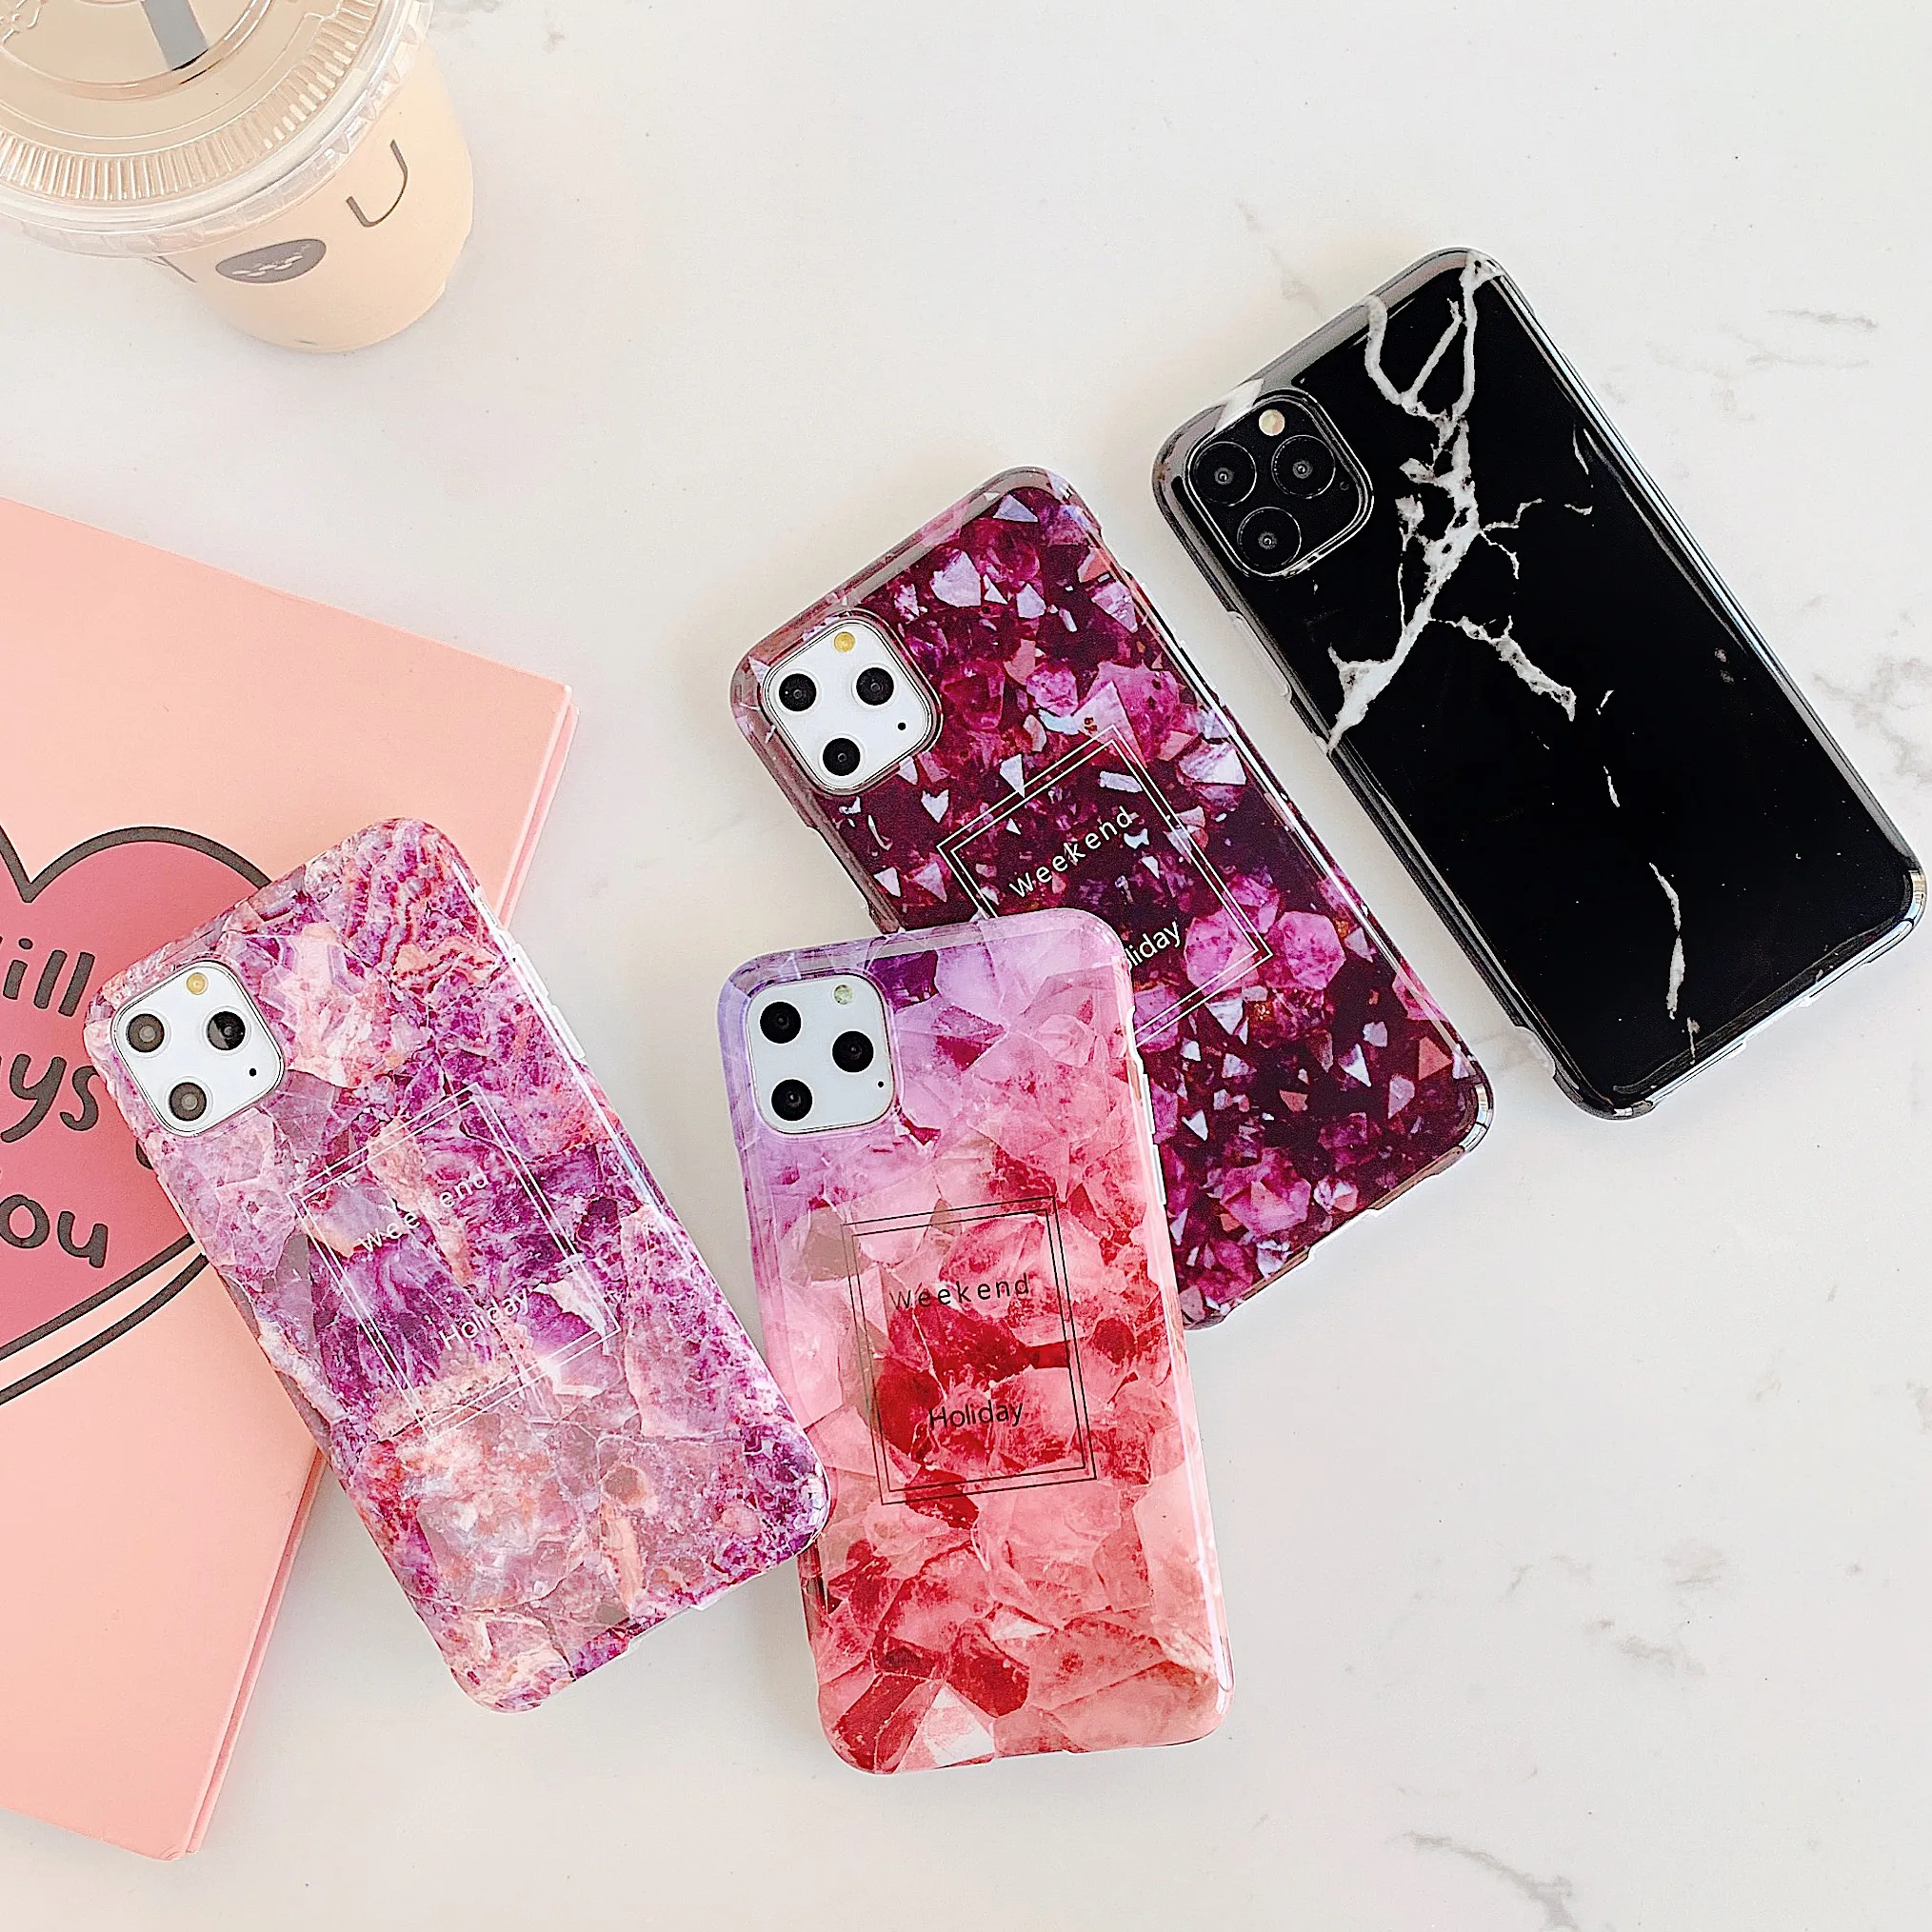 

Luxury Glossy Marble Case For iPhone 12Pro Max 12Mini 11Pro Shockproof And Fall Resistant, Fancy High Quality IMD Case